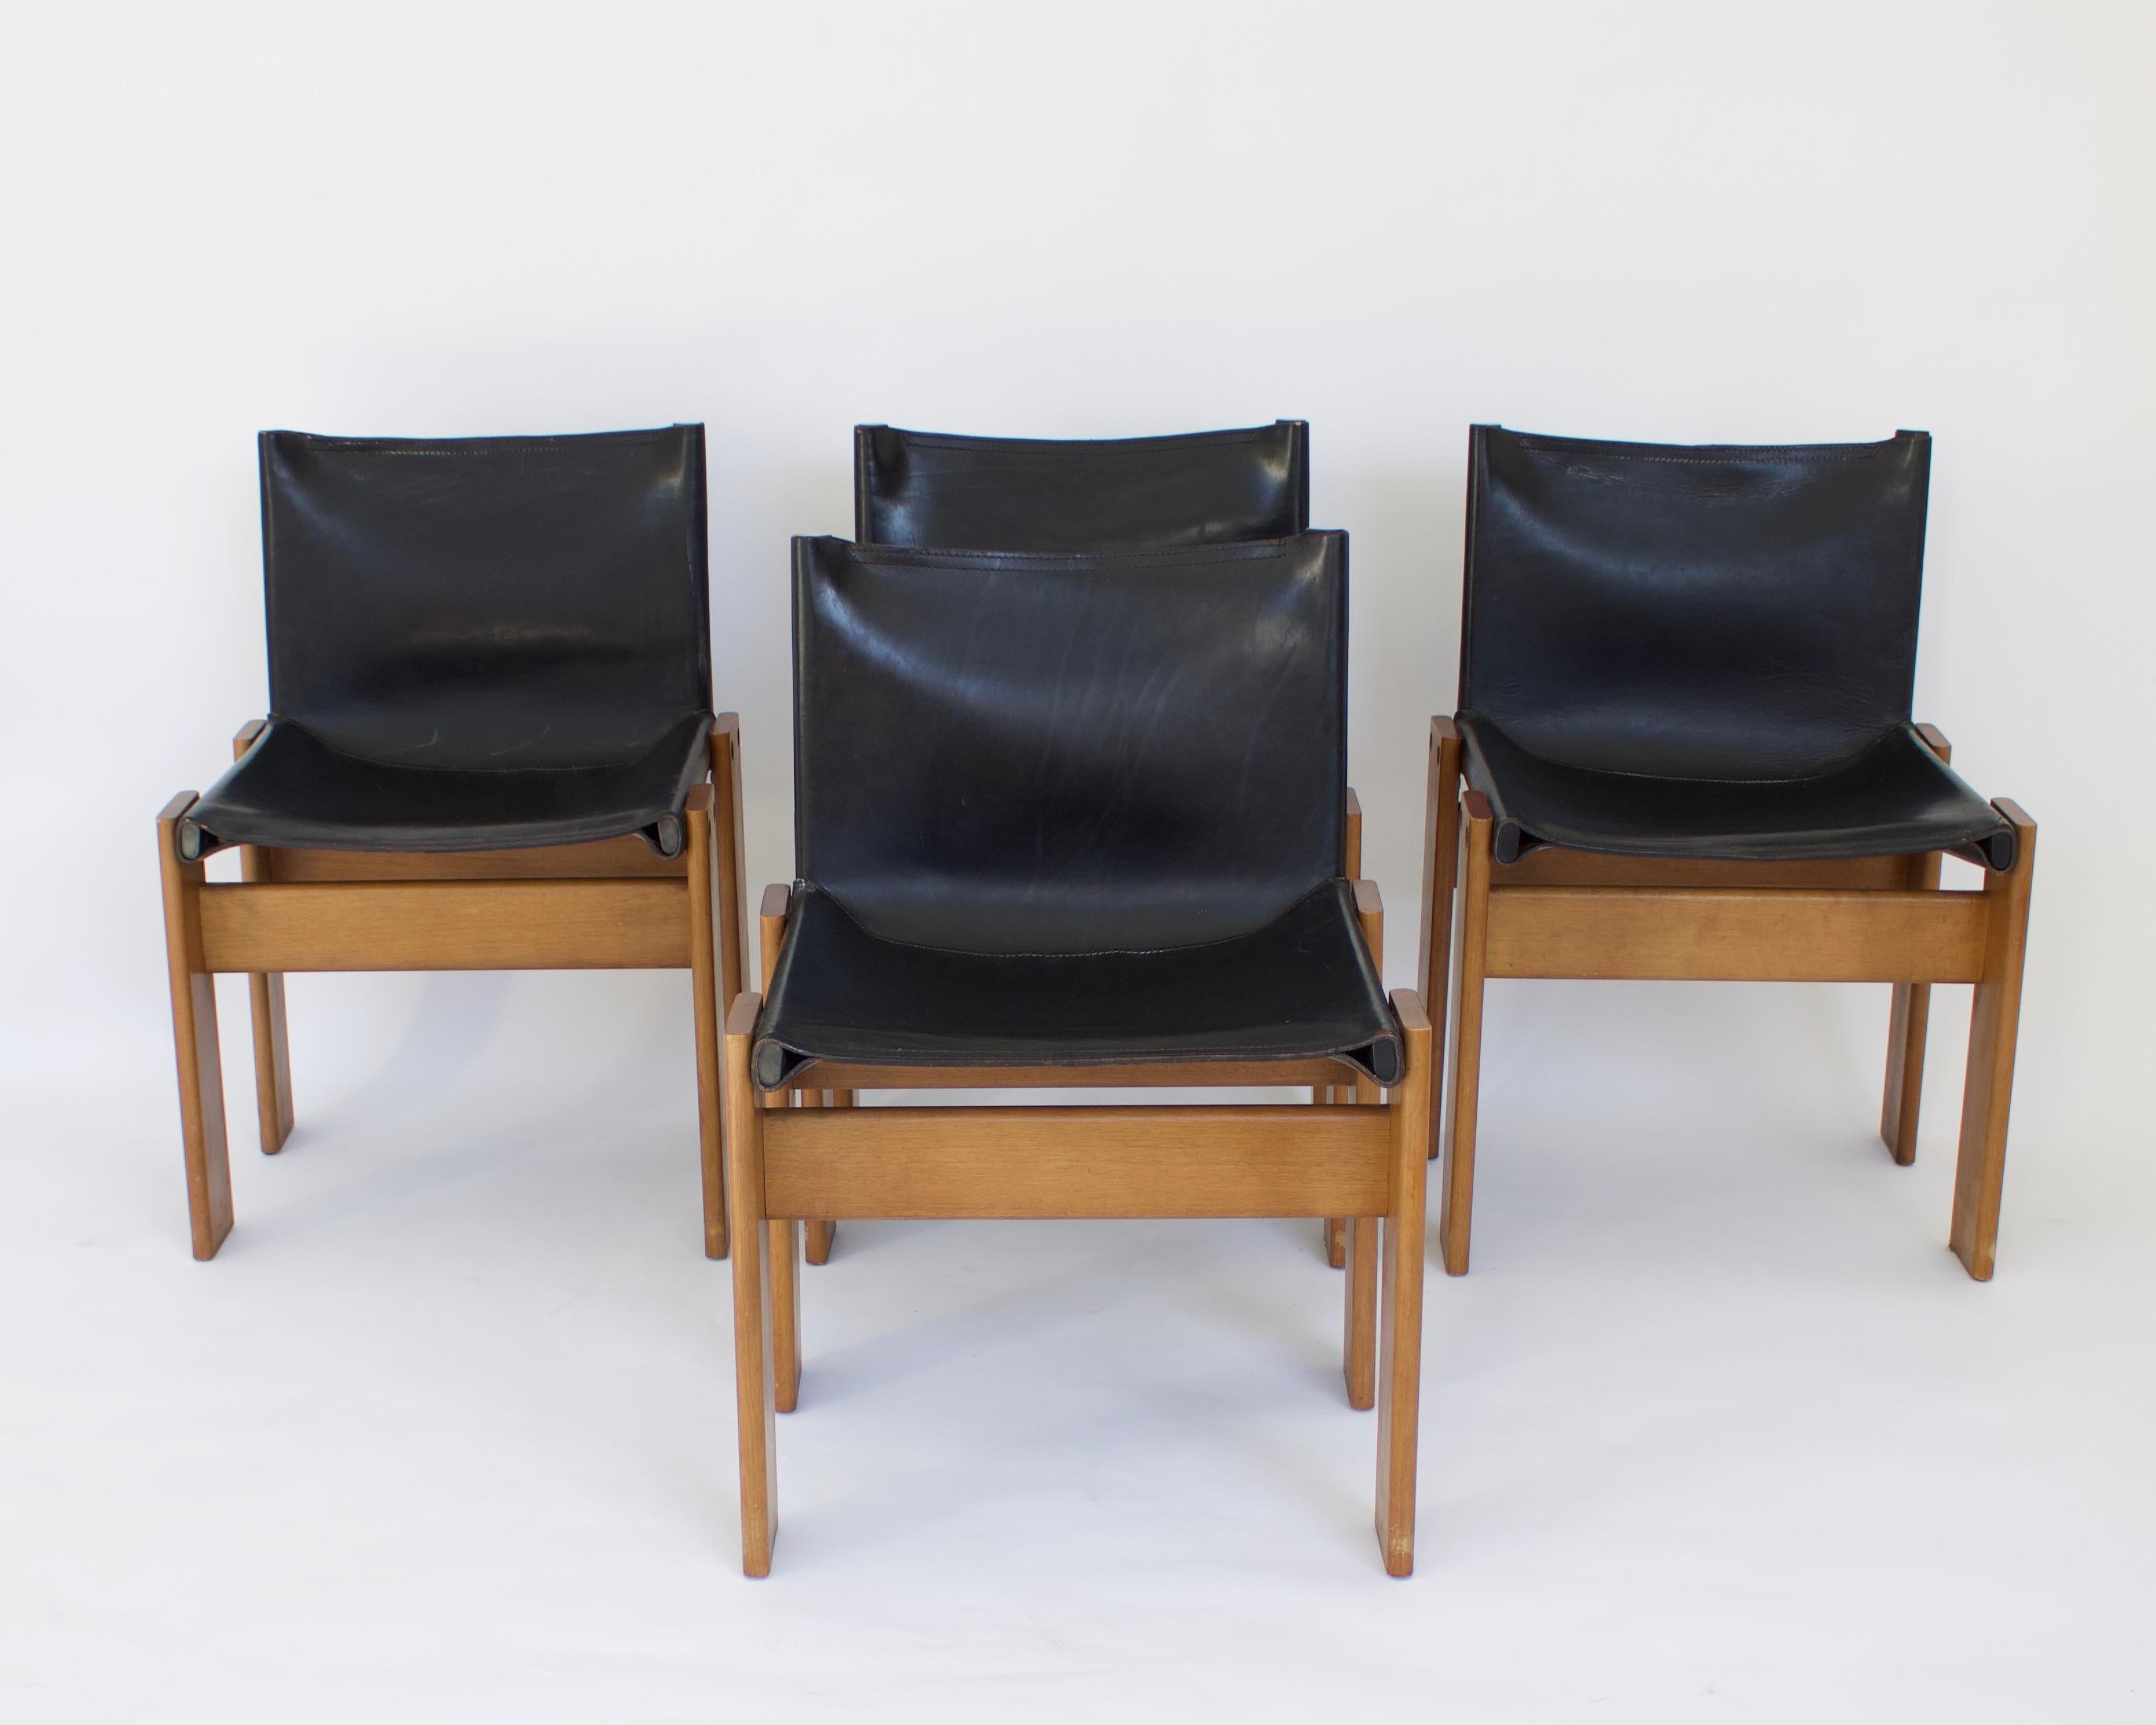 The particular feature of this model is the support structure composed of two equal trestles in solid wood attached to shaped metal tubing, creating a single element for the seat and back. The two structural parts are joined by two pairs of bolts